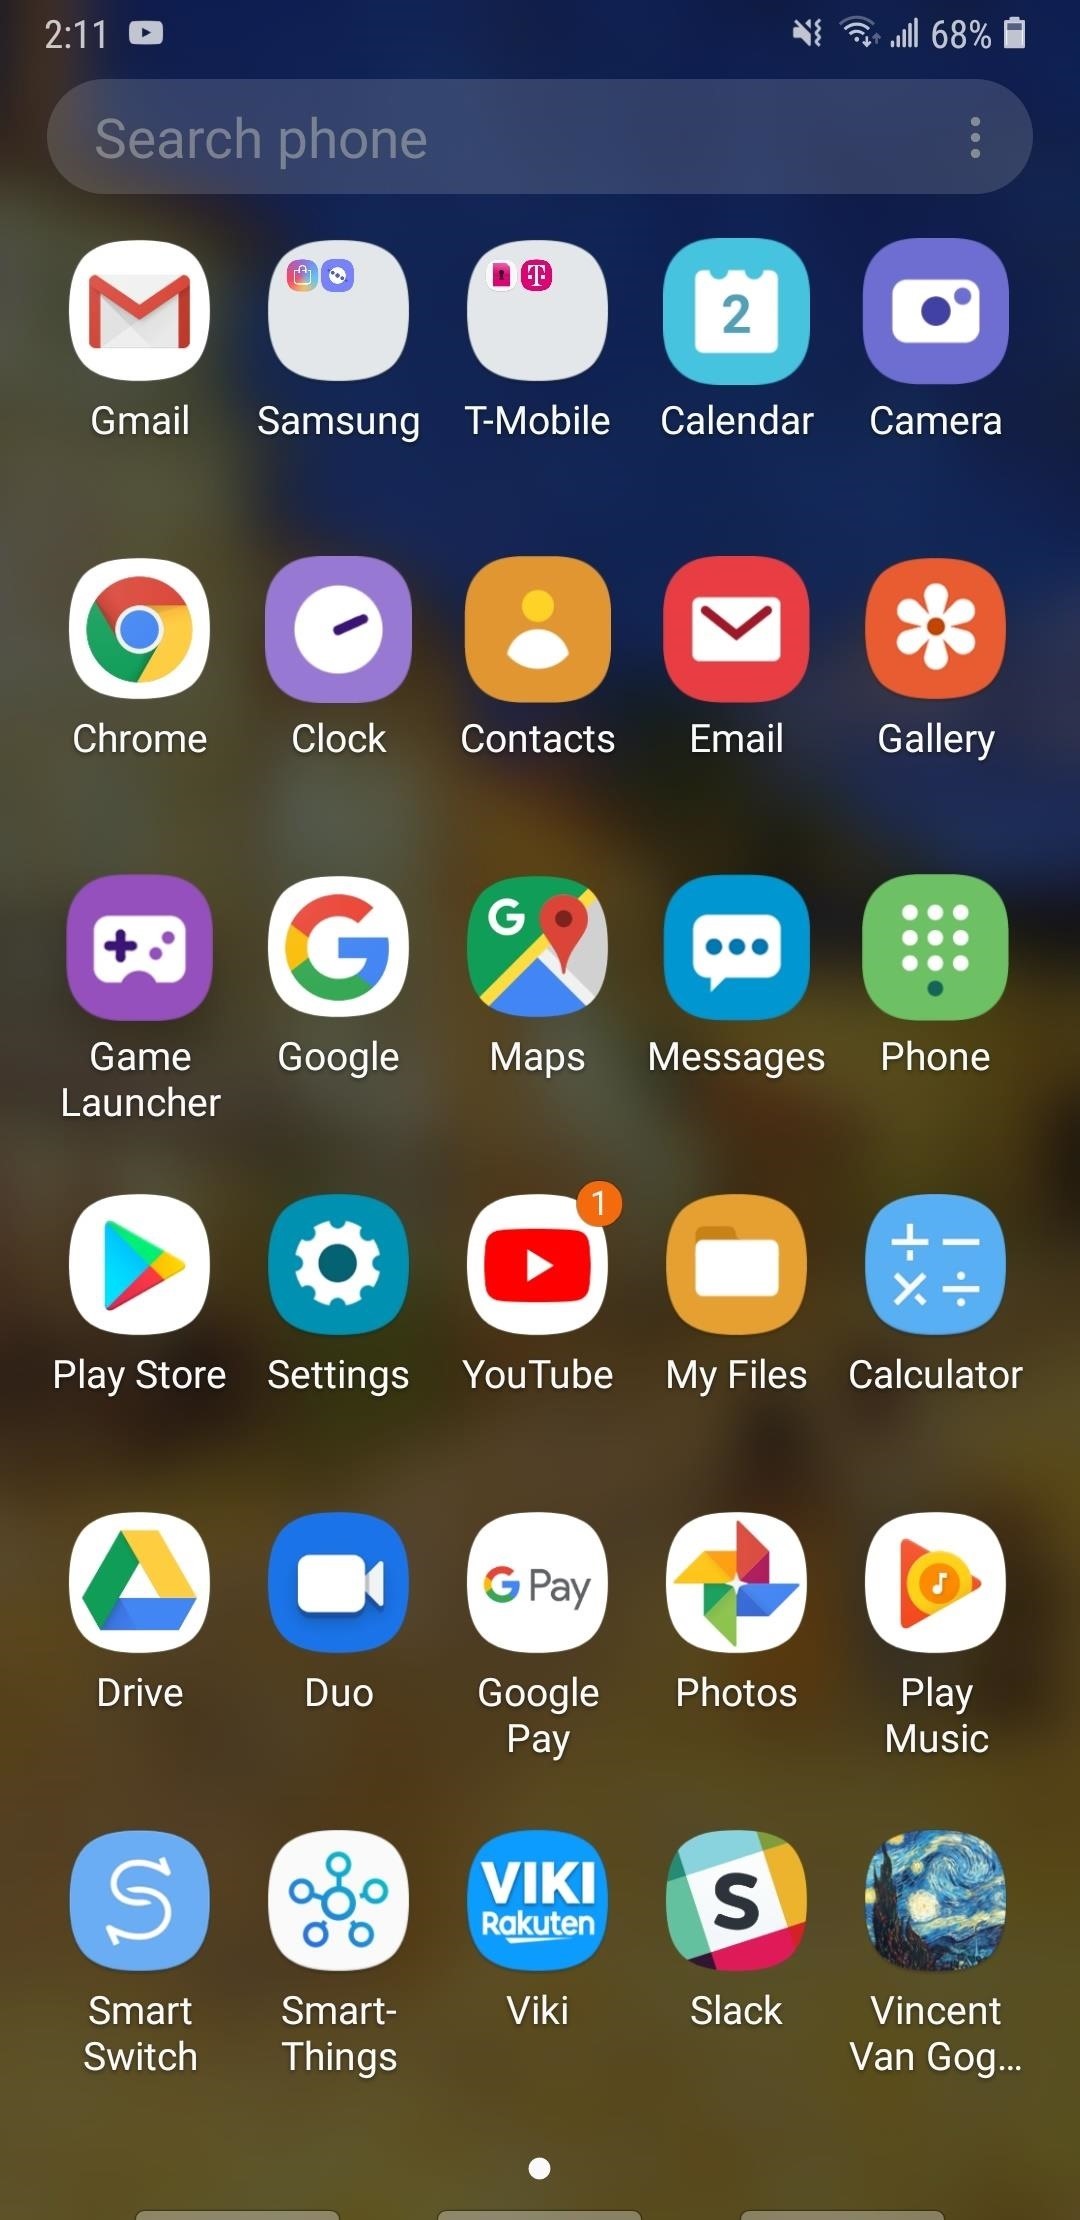 Samsung Android Pie Update: Galaxy Devices Are Getting All-New Home Screen Icons